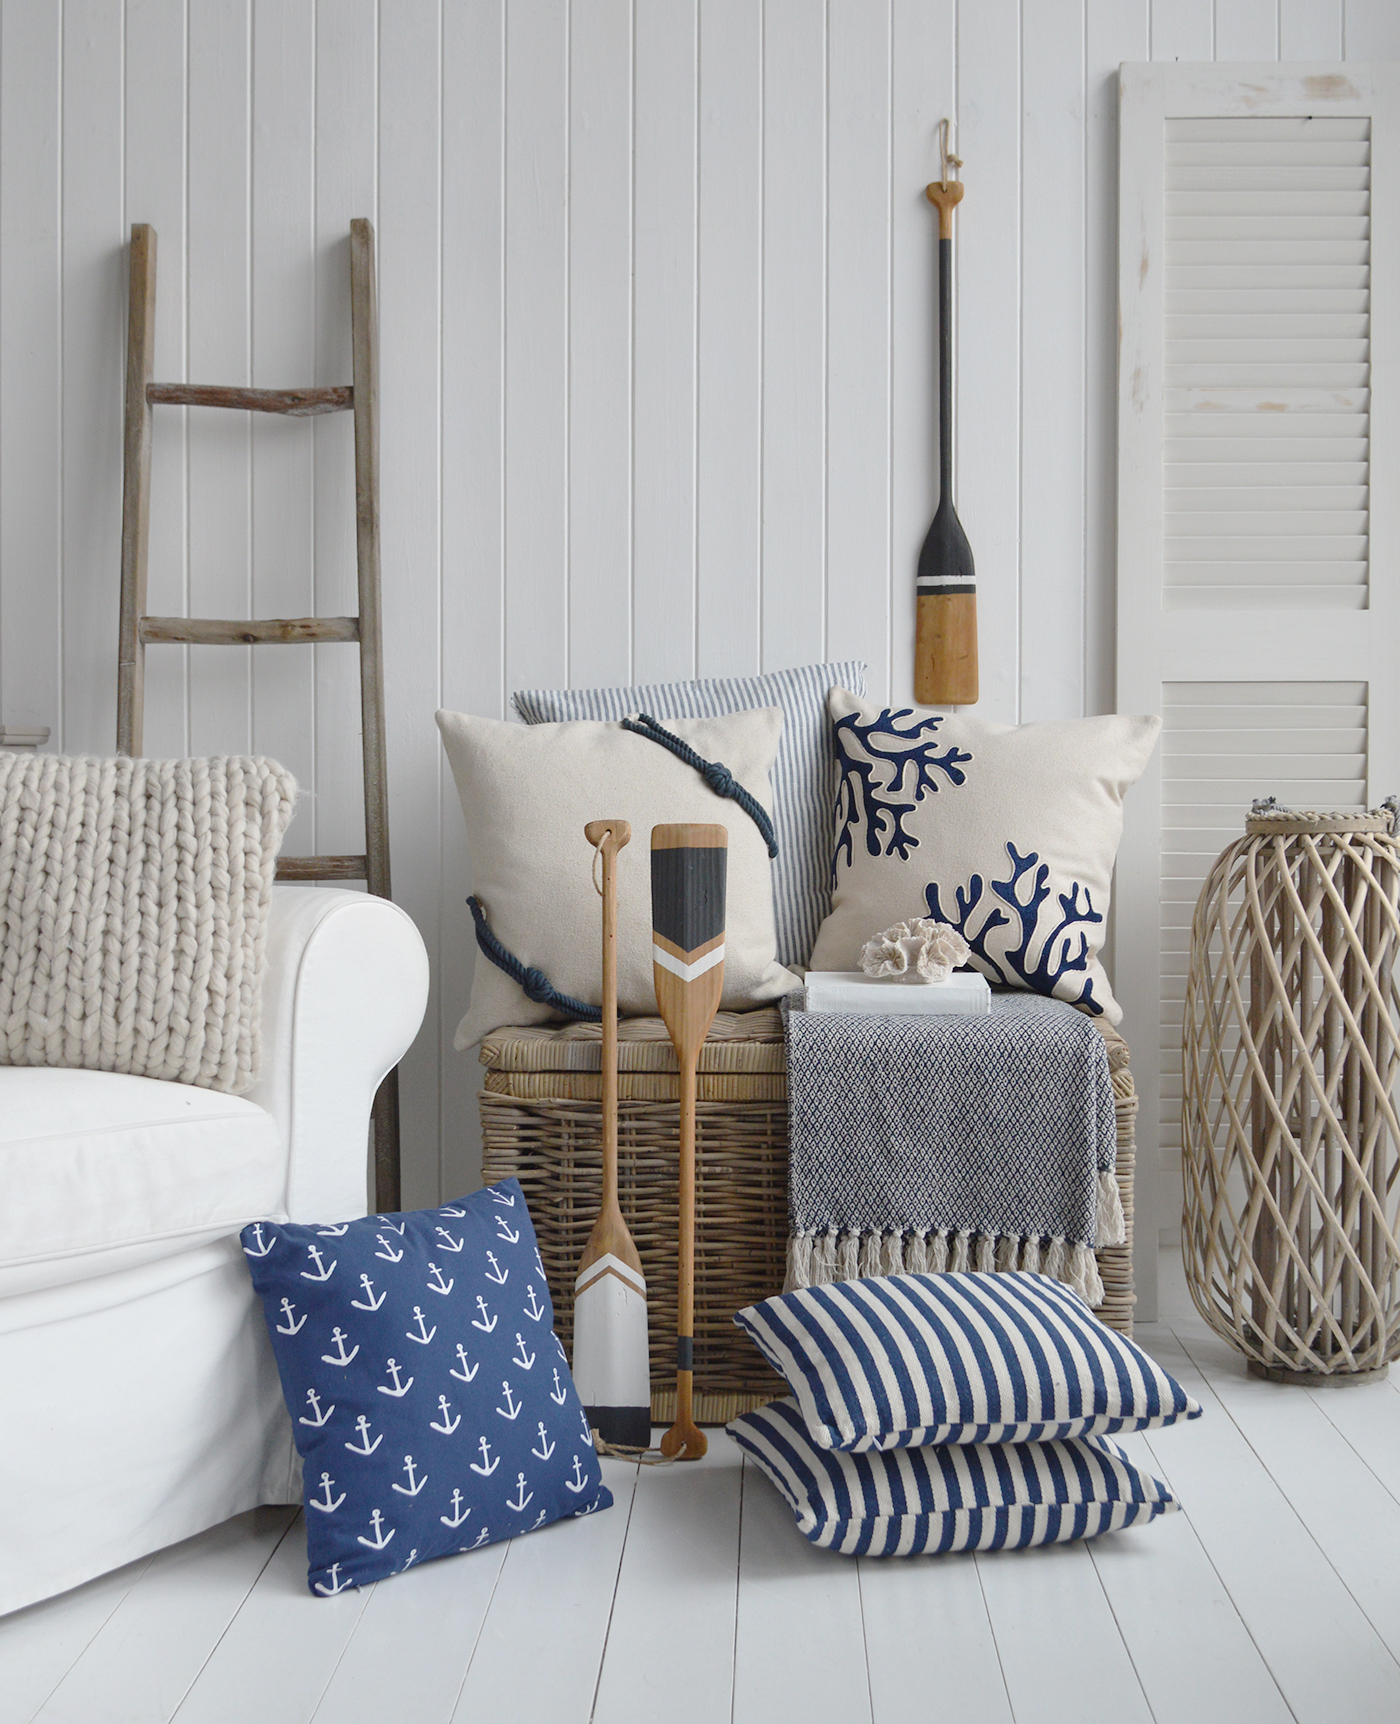 Range of luxury coastal cushions in navy and white for a chic Hamptons look and interior design 